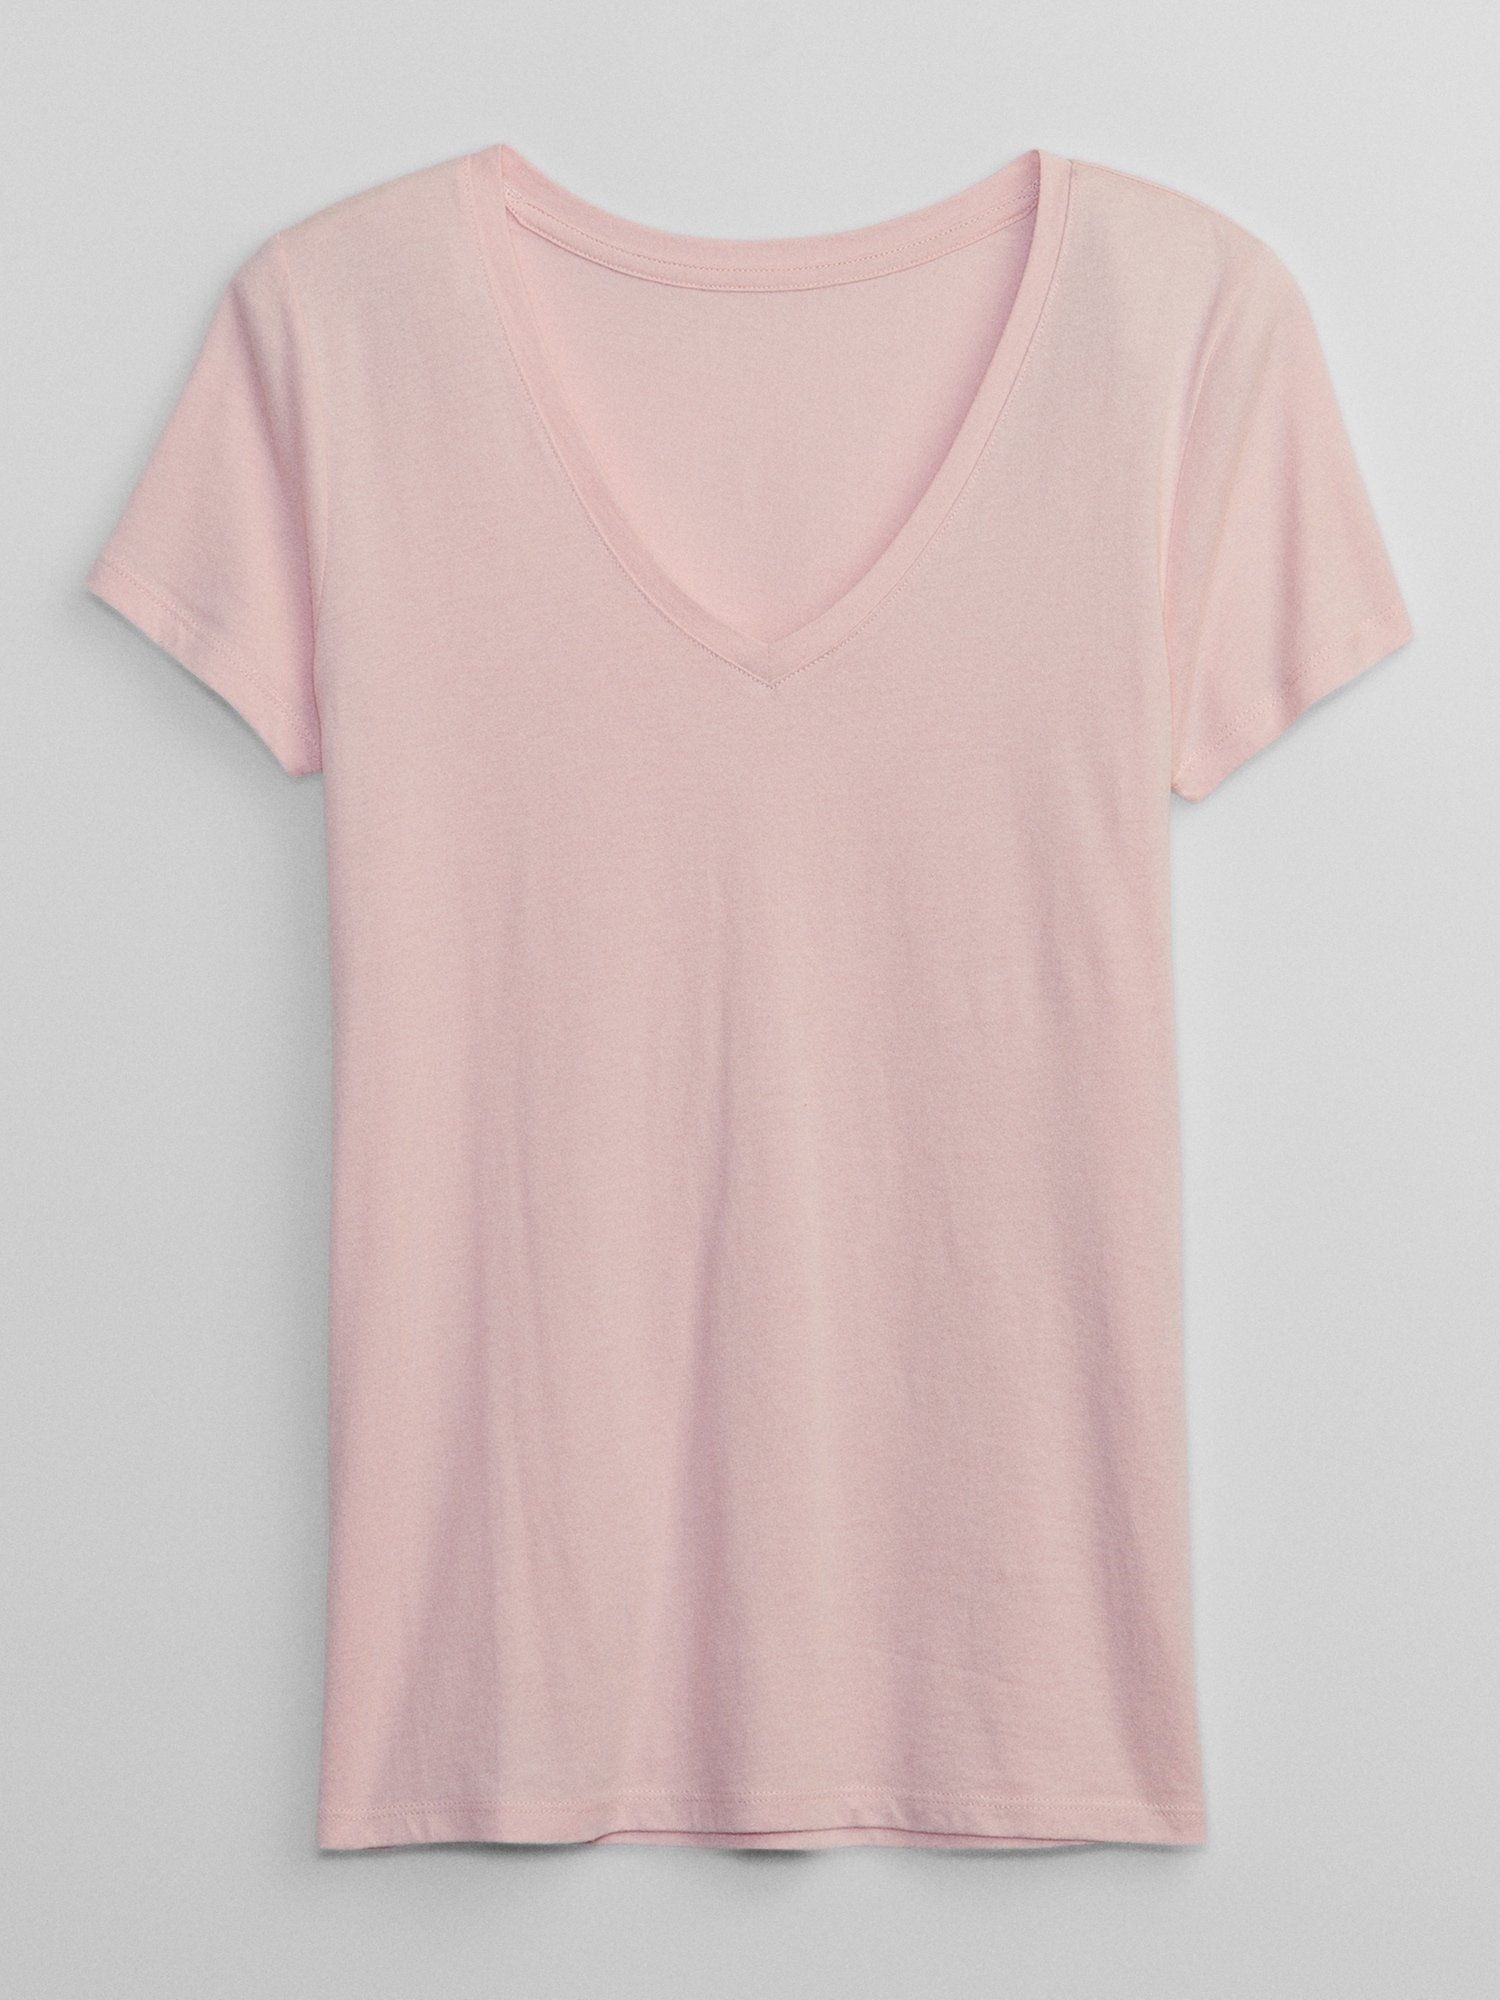 Short Sleeve V-Neck In Sweet Pink - Shirts For Tall Women